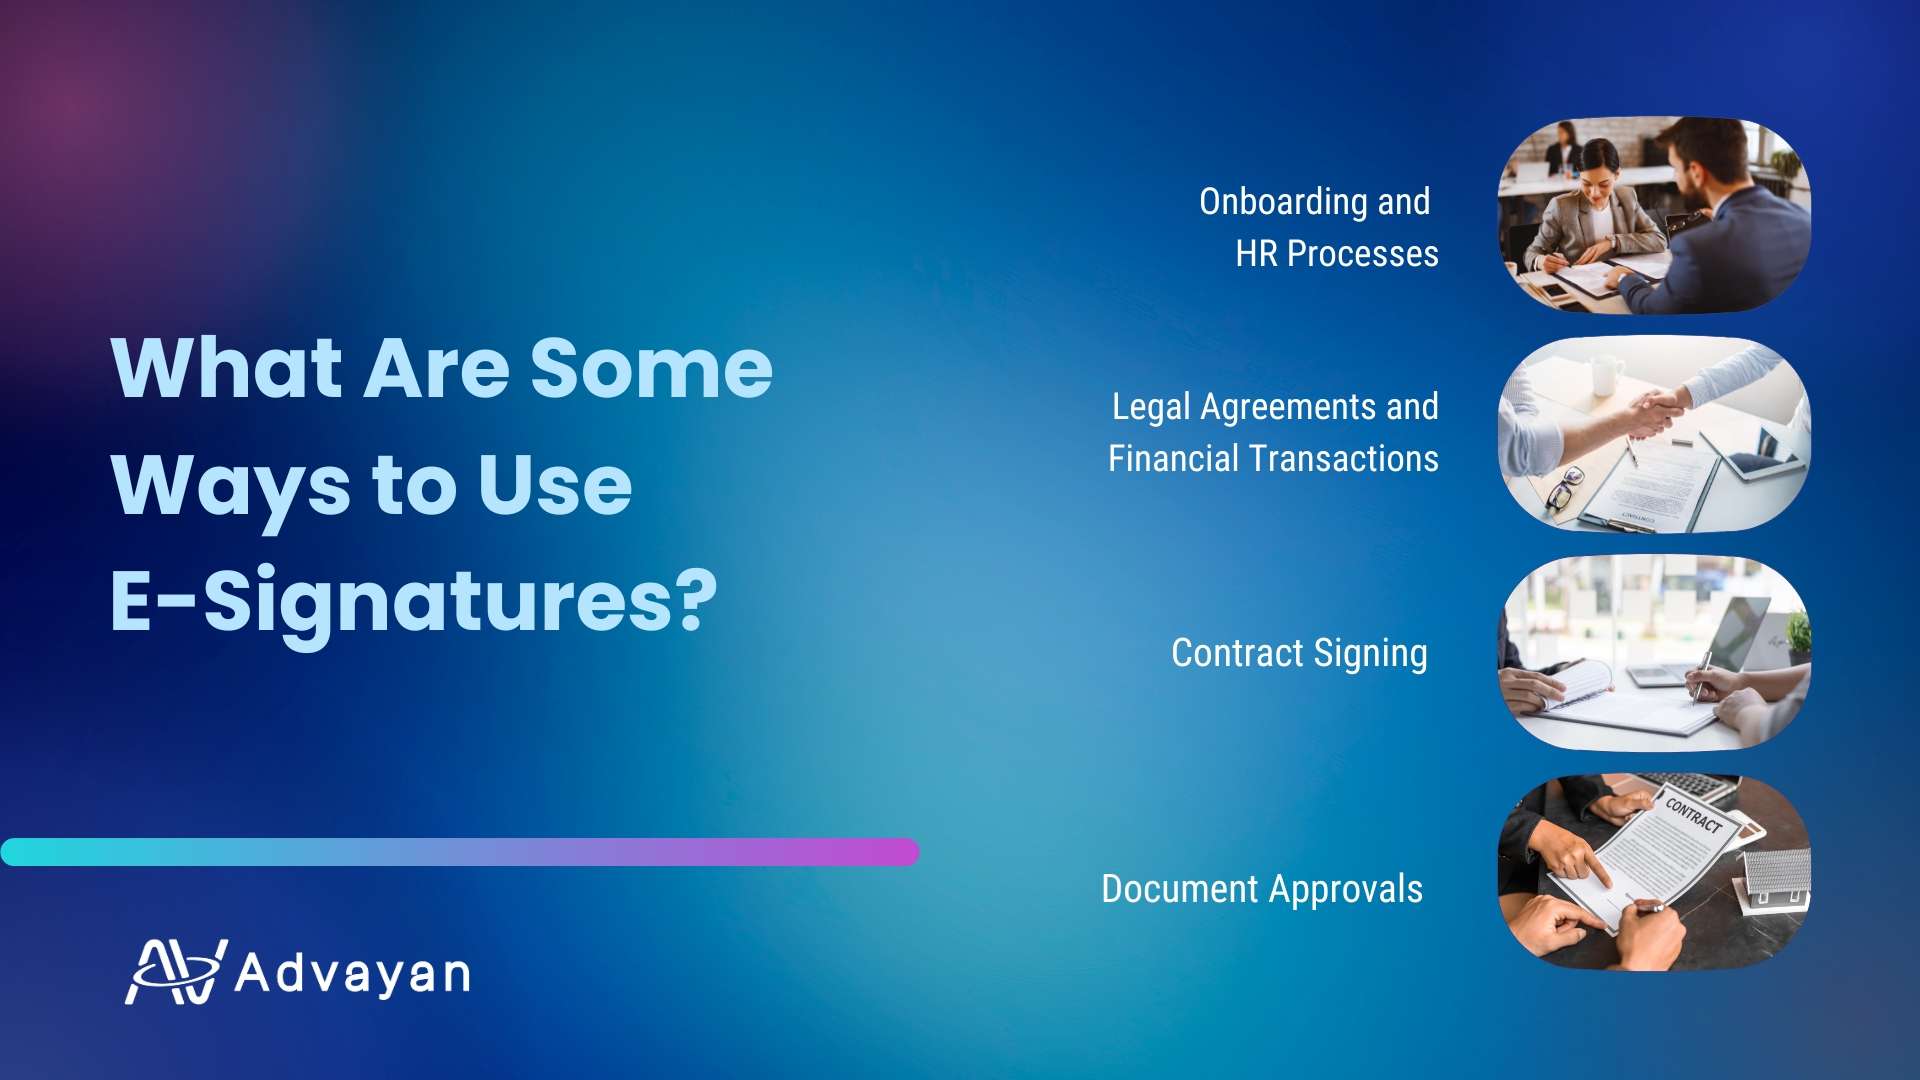 What Are Some Ways to Use E-Signatures? 